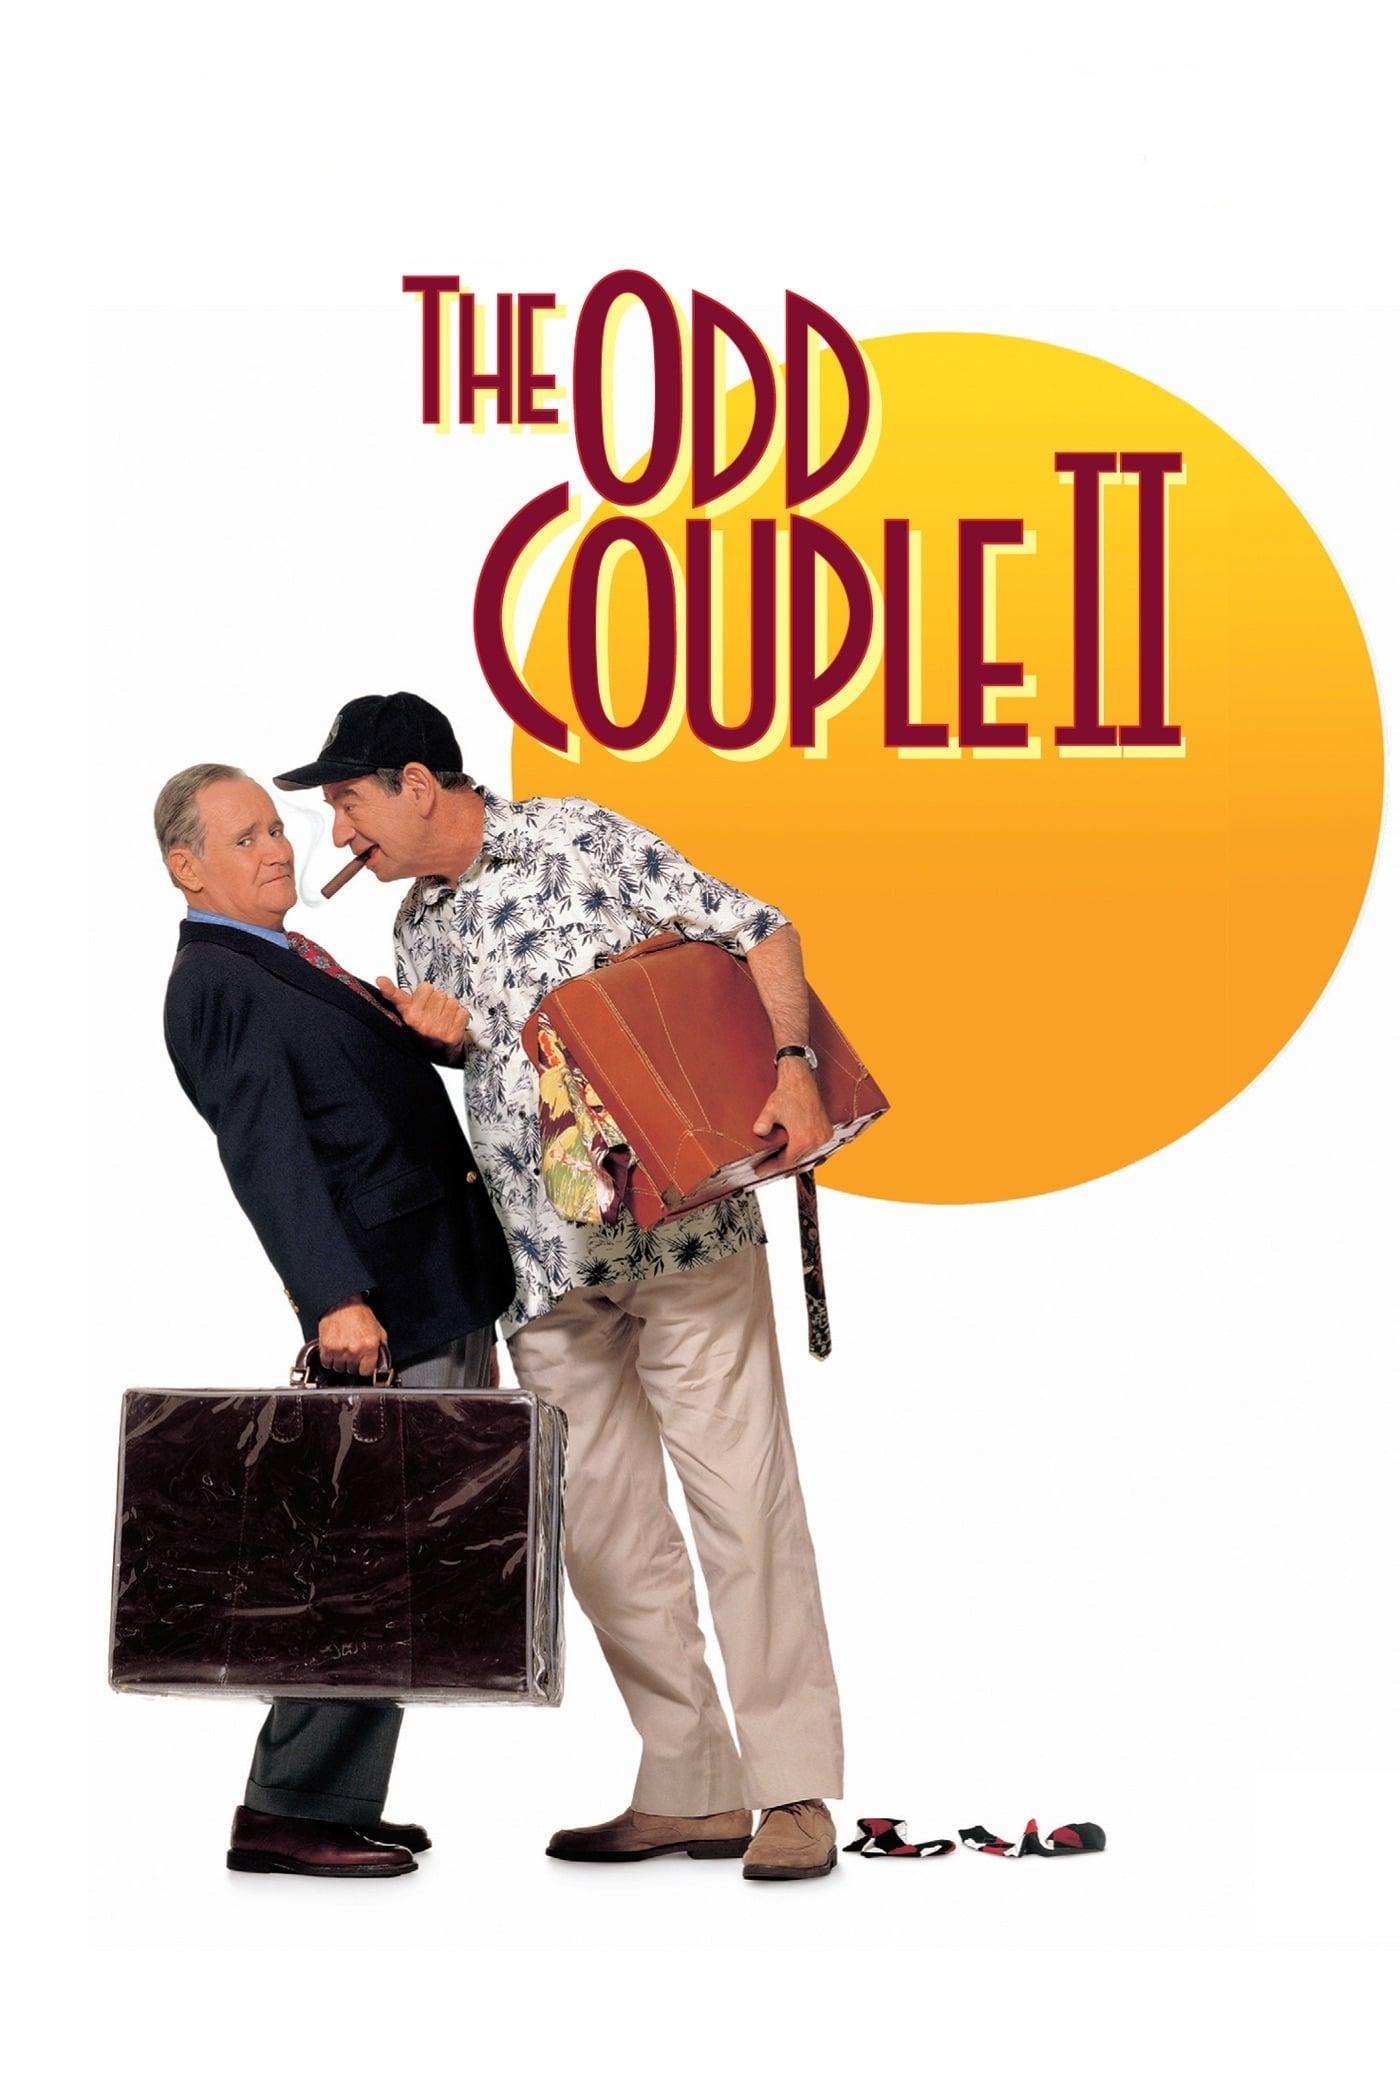 The Odd Couple II poster